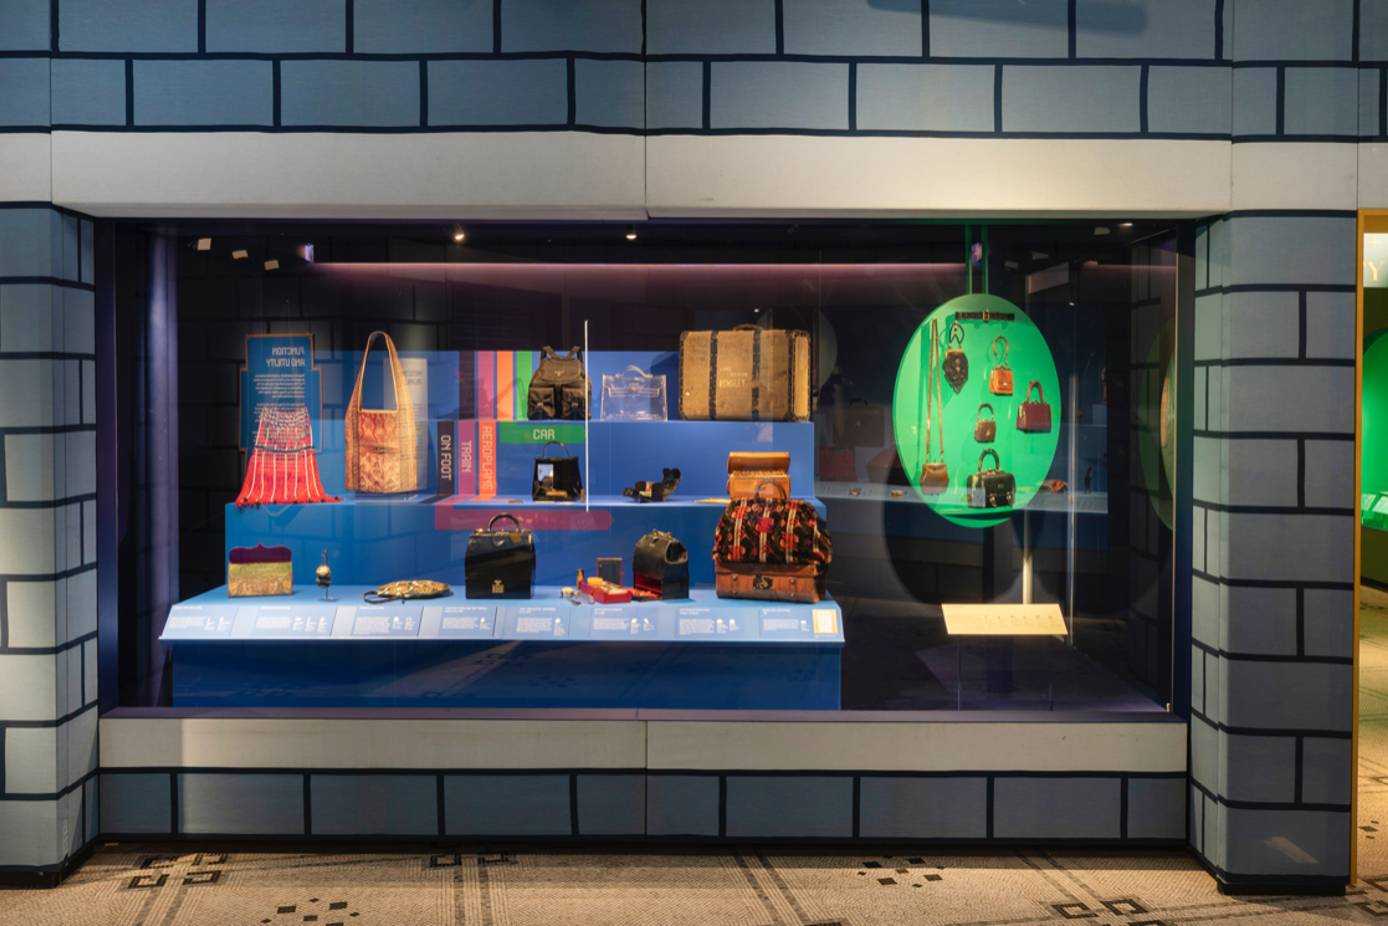 Victoria and Albert Museum reopens with 'Bags: Inside Out' exhibition